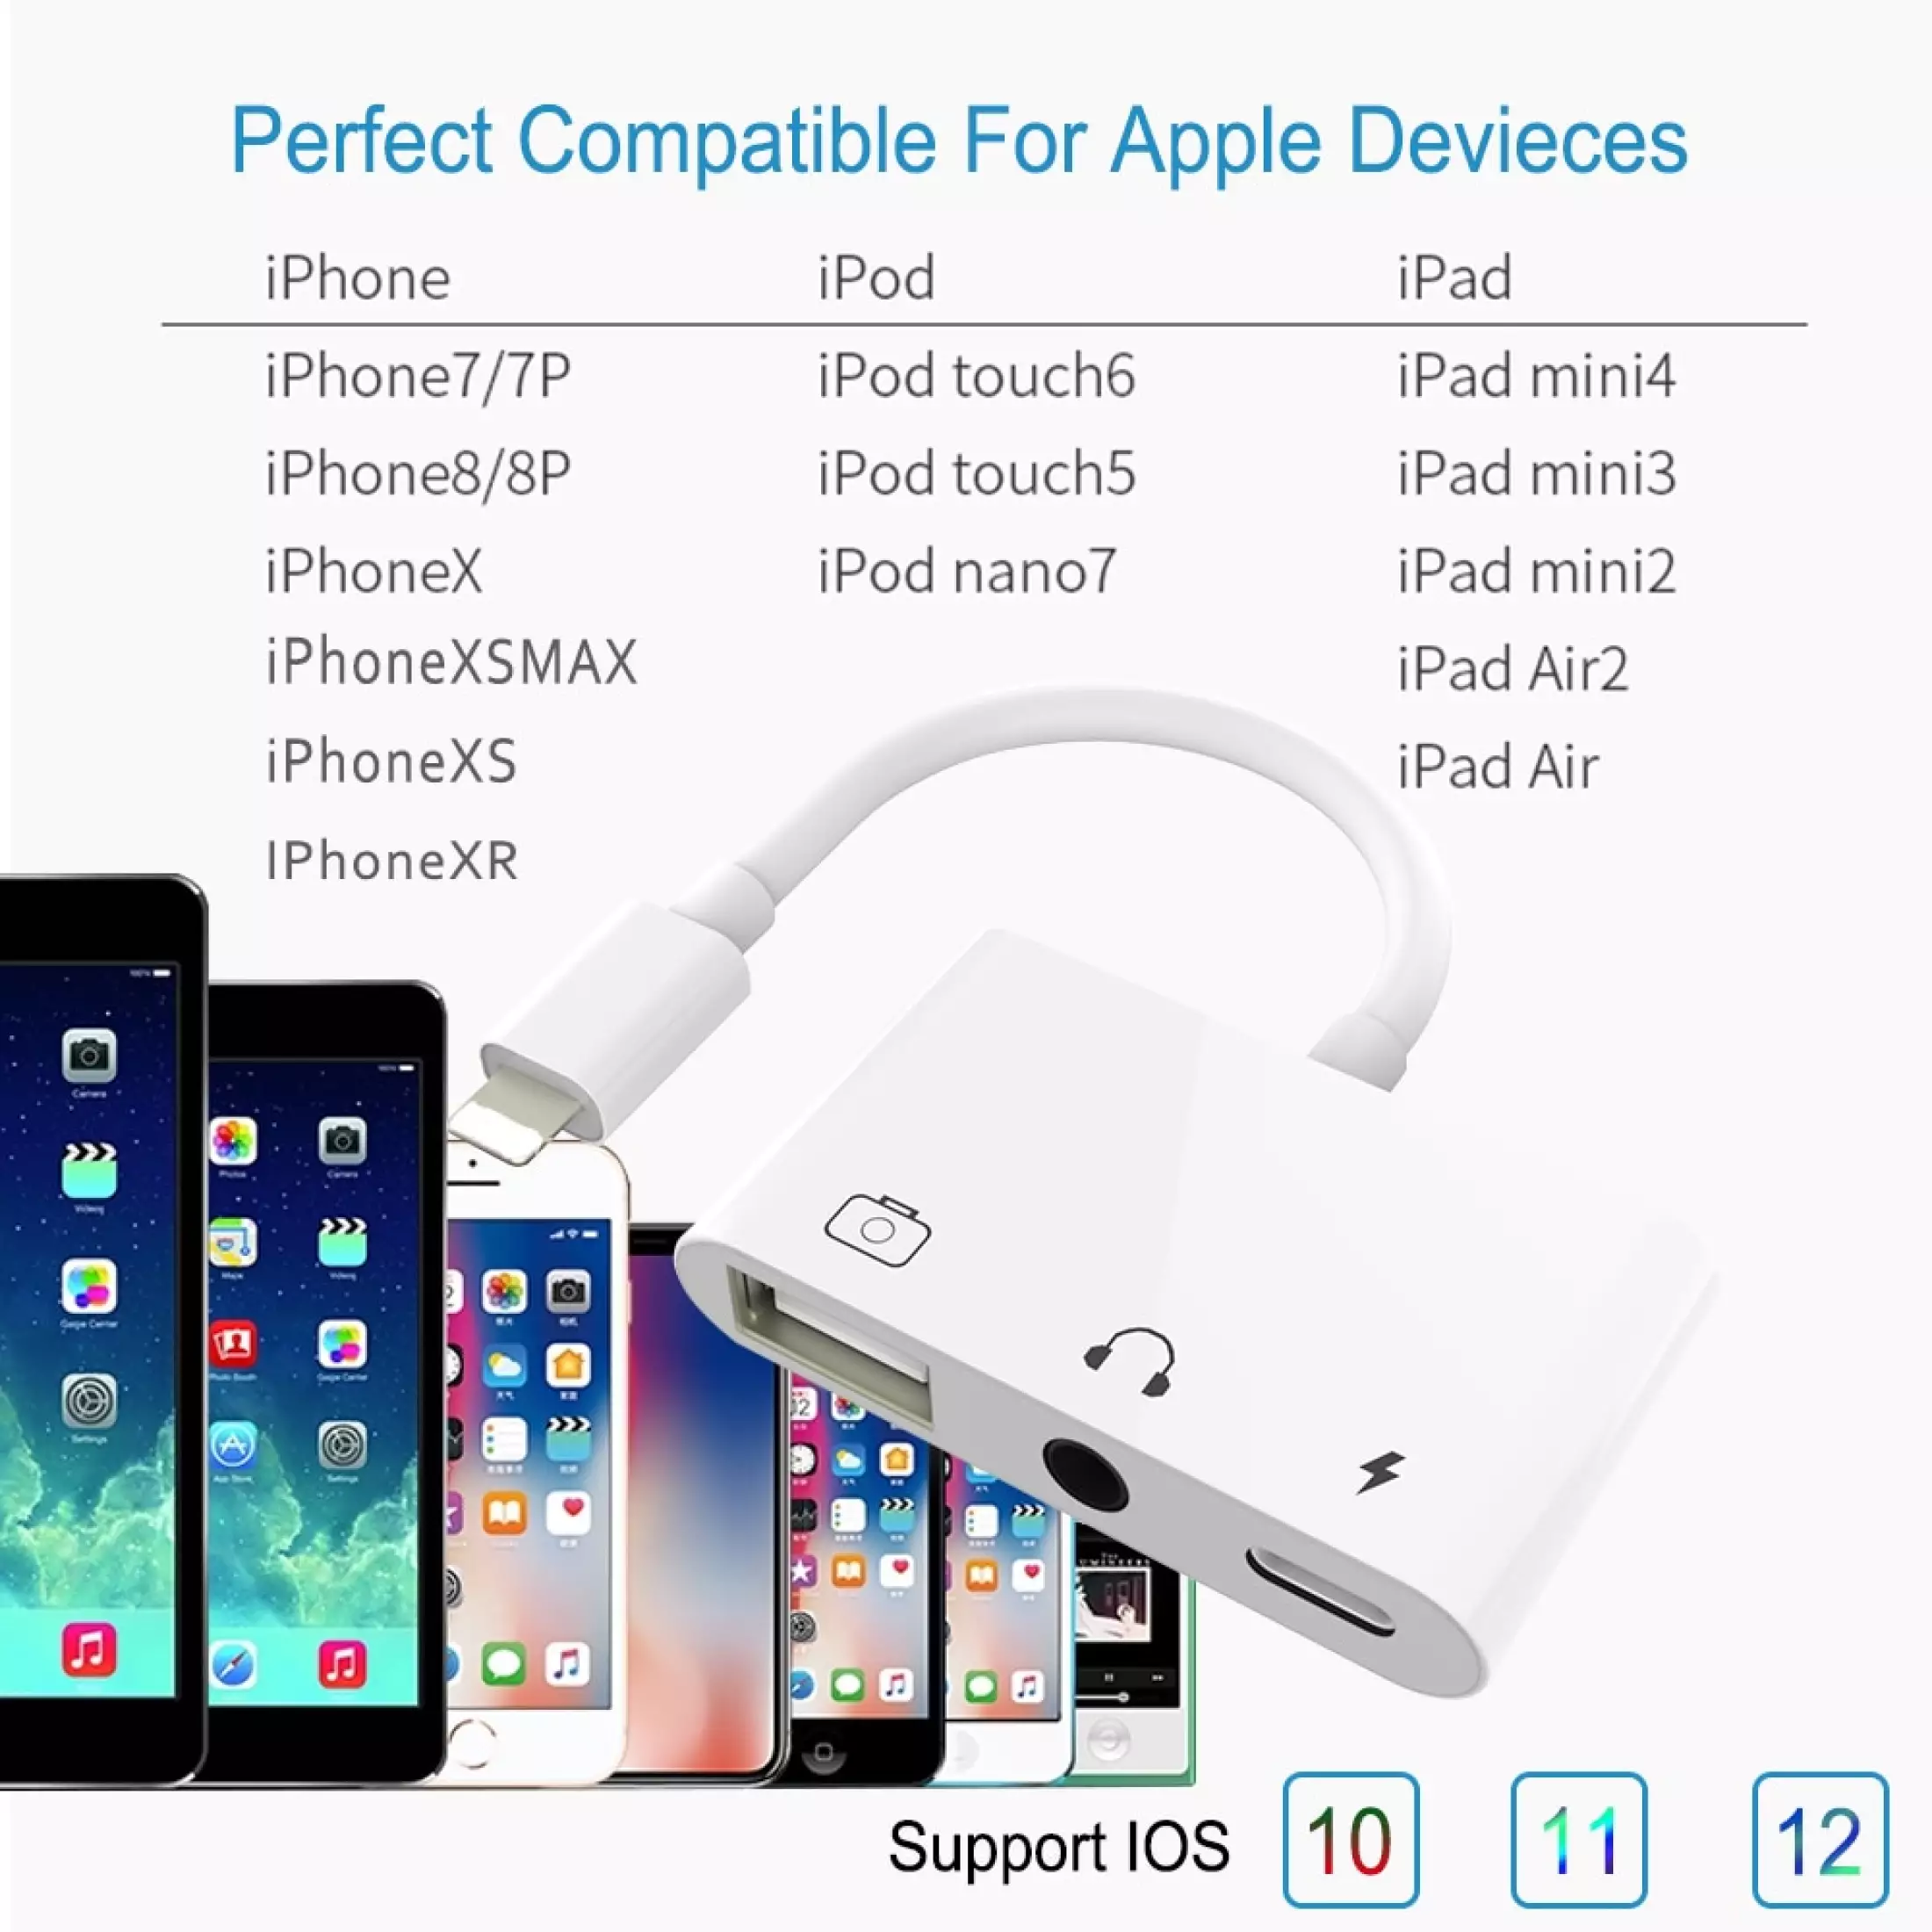 Charging Splitter Compatible with iPhone X 8 7 6,Support Card Reader,MIDI Interface,USB Ethernet Adapter,Hubs USB 3 Camera Adapter,3 in 1 USB Female OTG Adapter with 3.5 mm Headphone Jack 